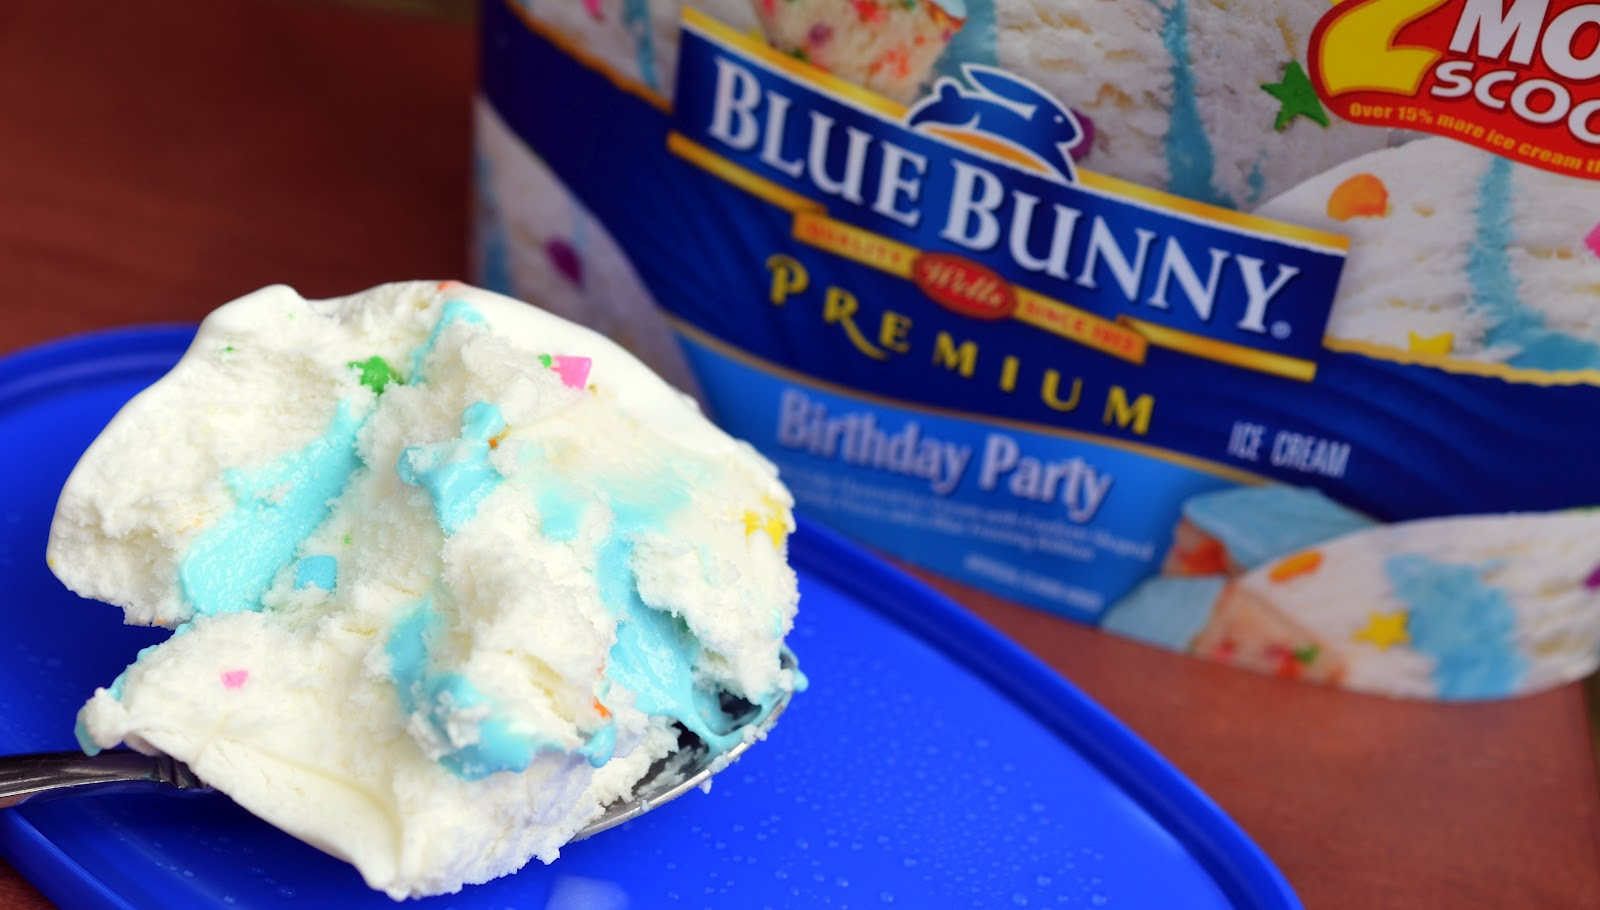 Best ideas about Blue Bunny Birthday Cake Ice Cream
. Save or Pin food and ice cream recipes REVIEW Blue Bunny Birthday Party Now.